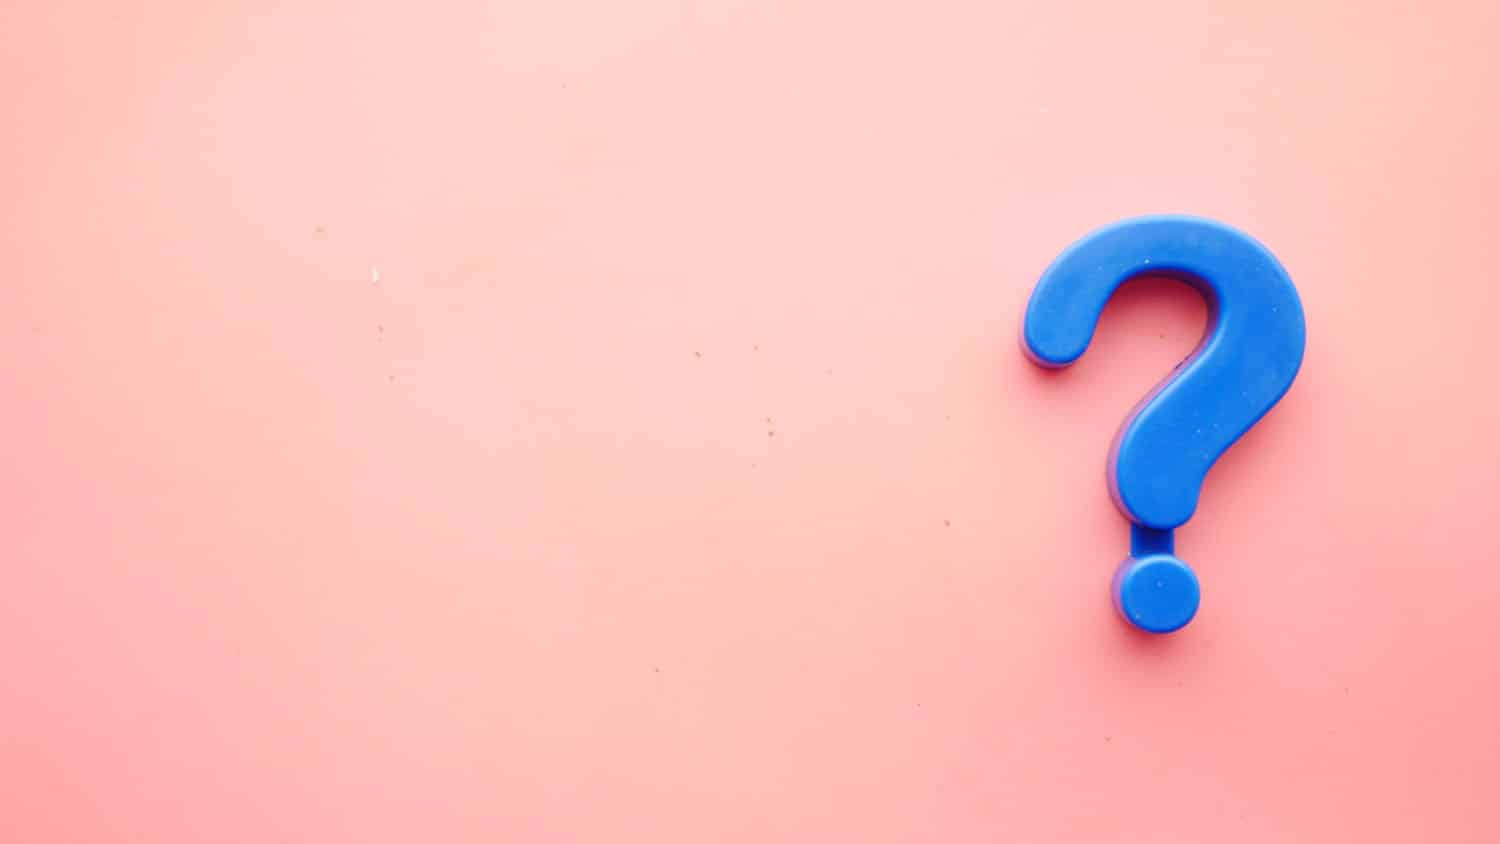 a blue question mark against a pink background